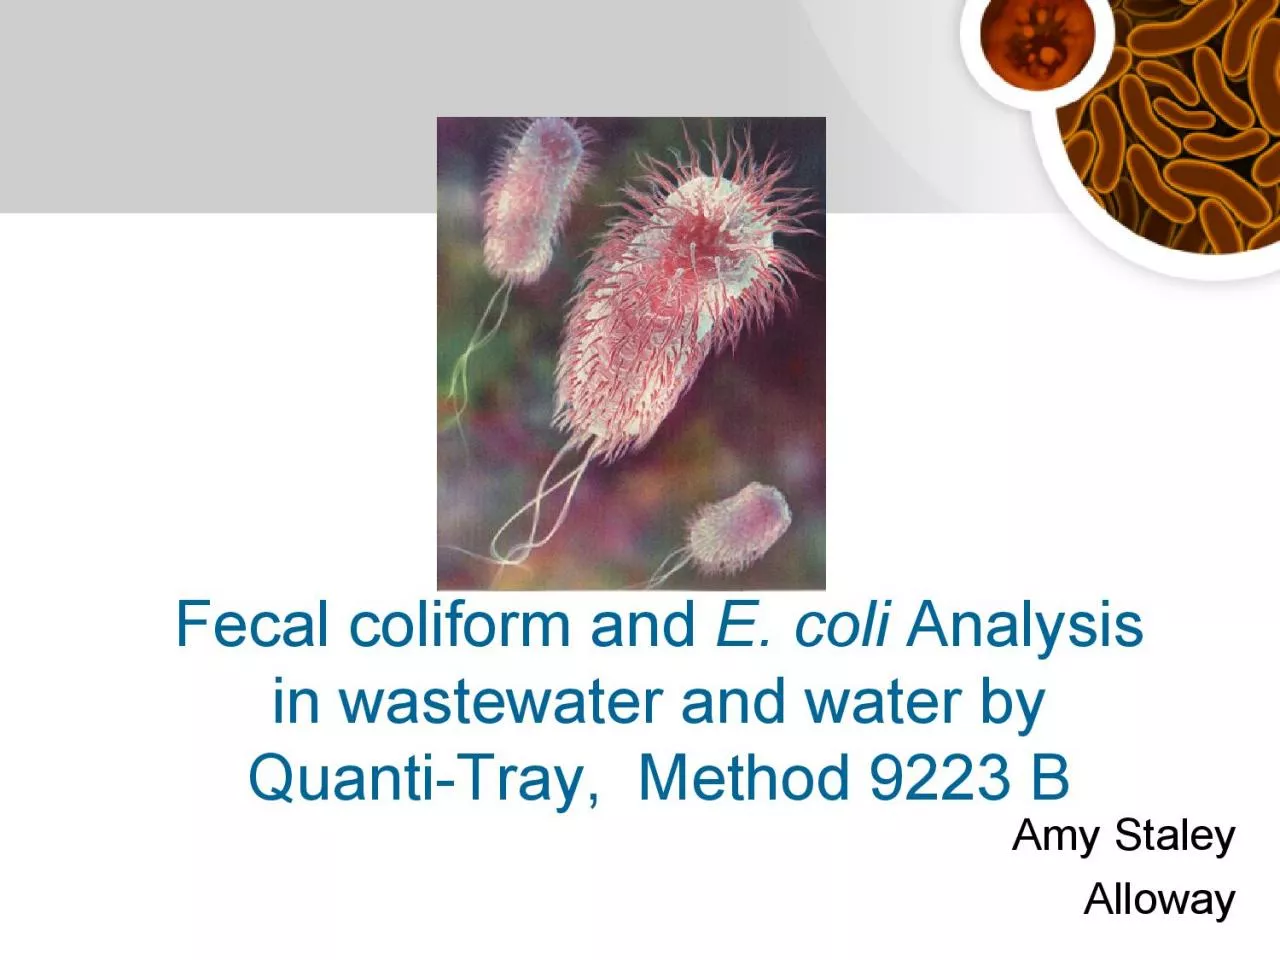 Fecal coliform and E coli Analysis in wastewater and water by QuantiT